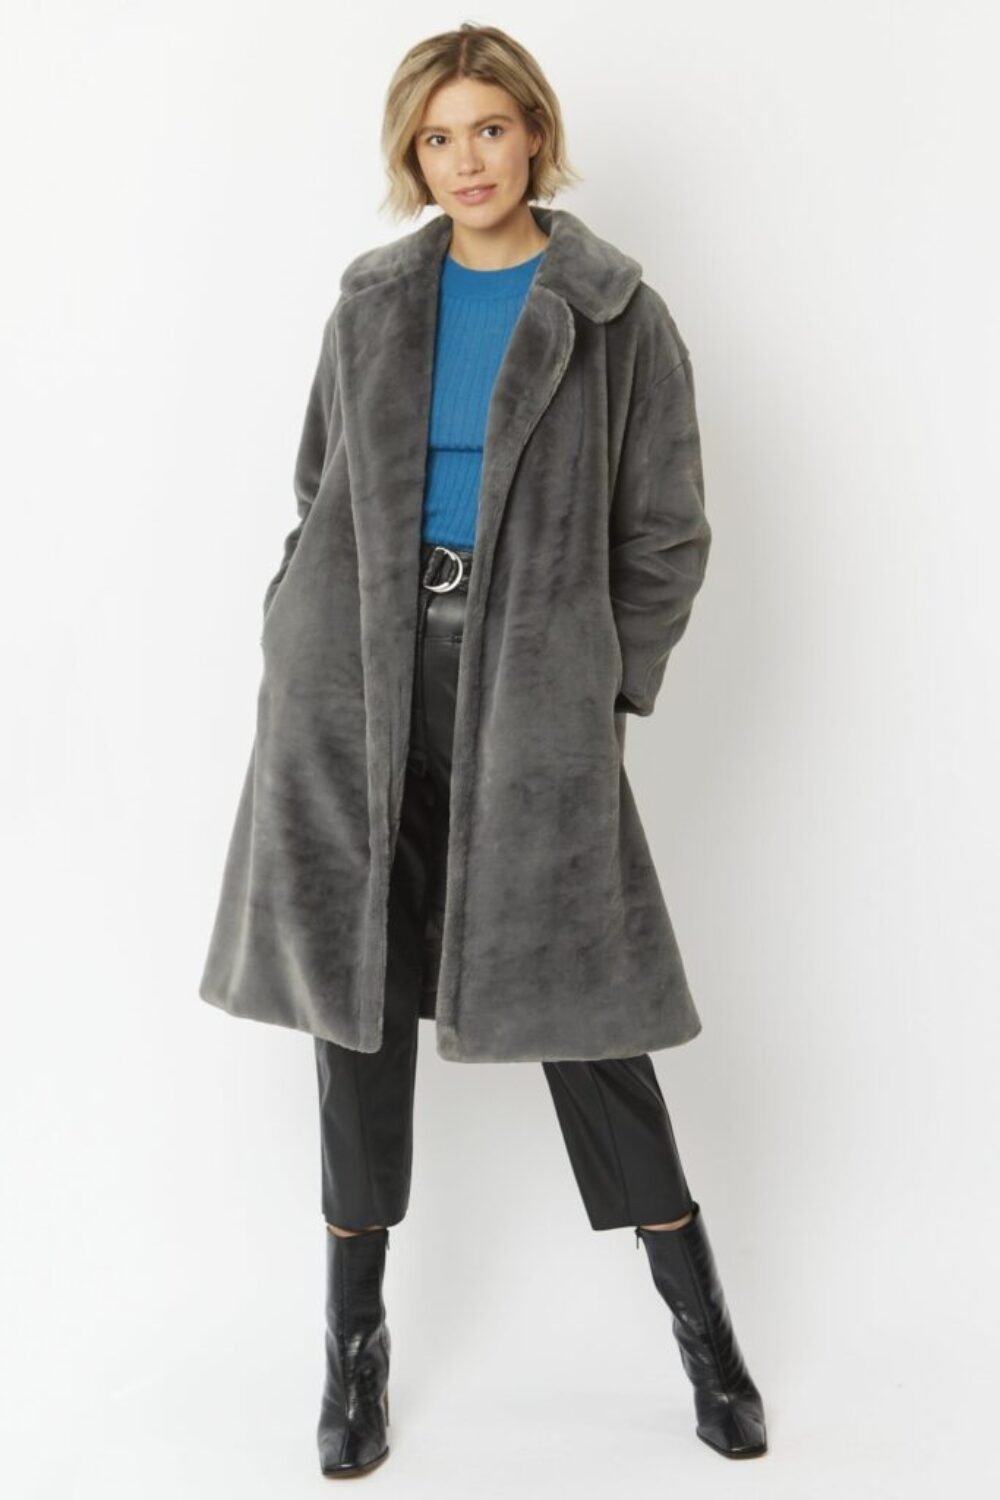 Shop Lux Grey Faux Fur Midi Shaved Shearling Coat and women's luxury and designer clothes at www.lux-apparel.co.uk